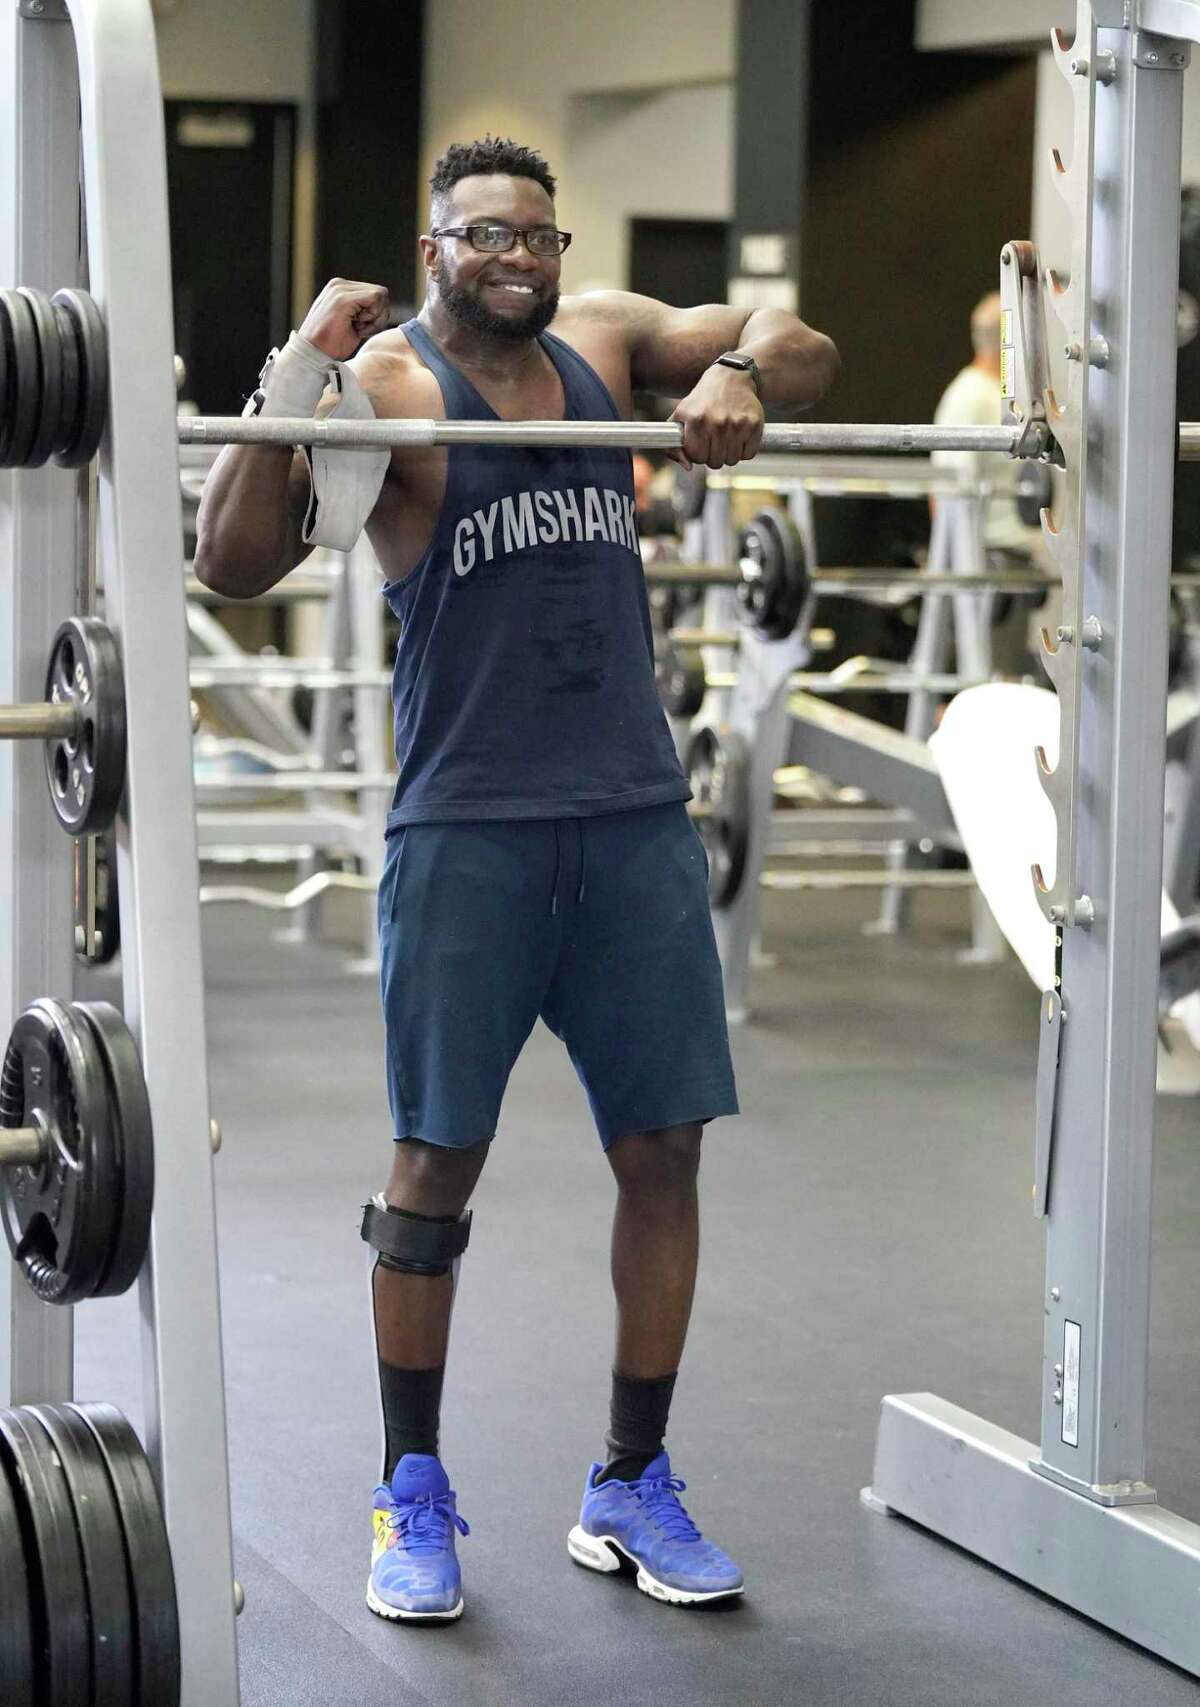 Kel Mabatah works out at Club Westside, 1200 Wilcrest Dr., Saturday, July 24, 2021 in Houston as he prepares for a bodybuilding competition. In Dec. 2014, he was brutal assaulted in Nigeria, where he was helping run his family’s business. He suffered traumatic brain injury, was partial paralyzed, and could not speak.